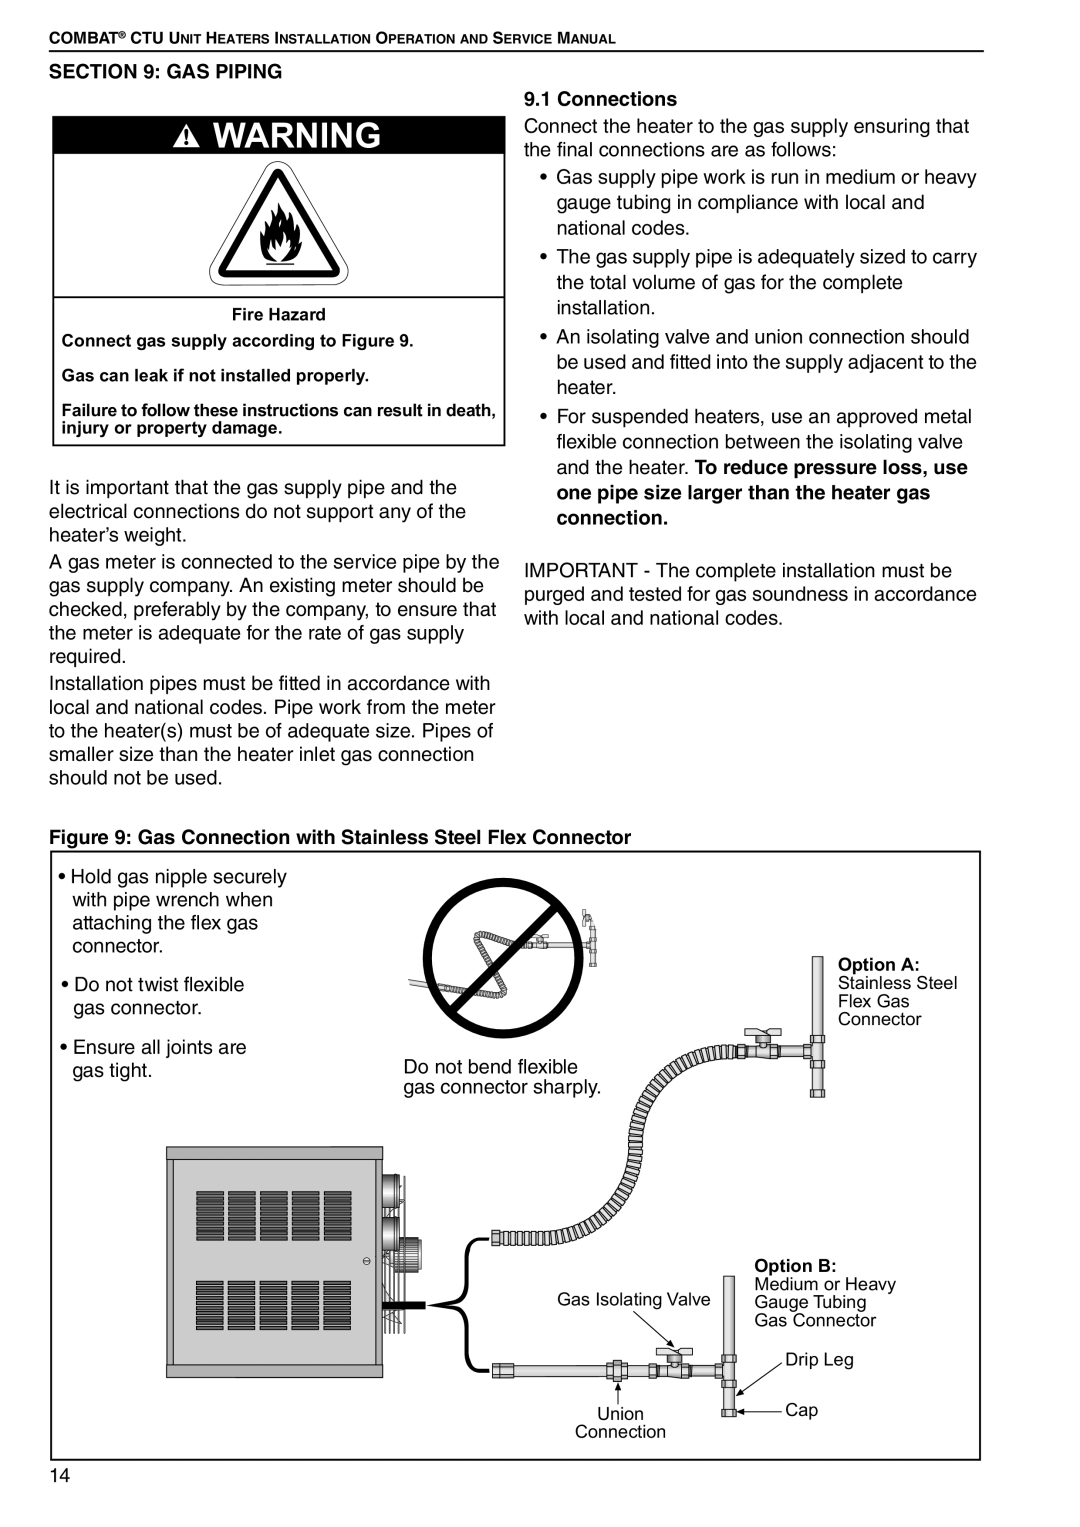 Roberts Gorden CTU 22 TO 115 service manual Gas Piping, Connections 